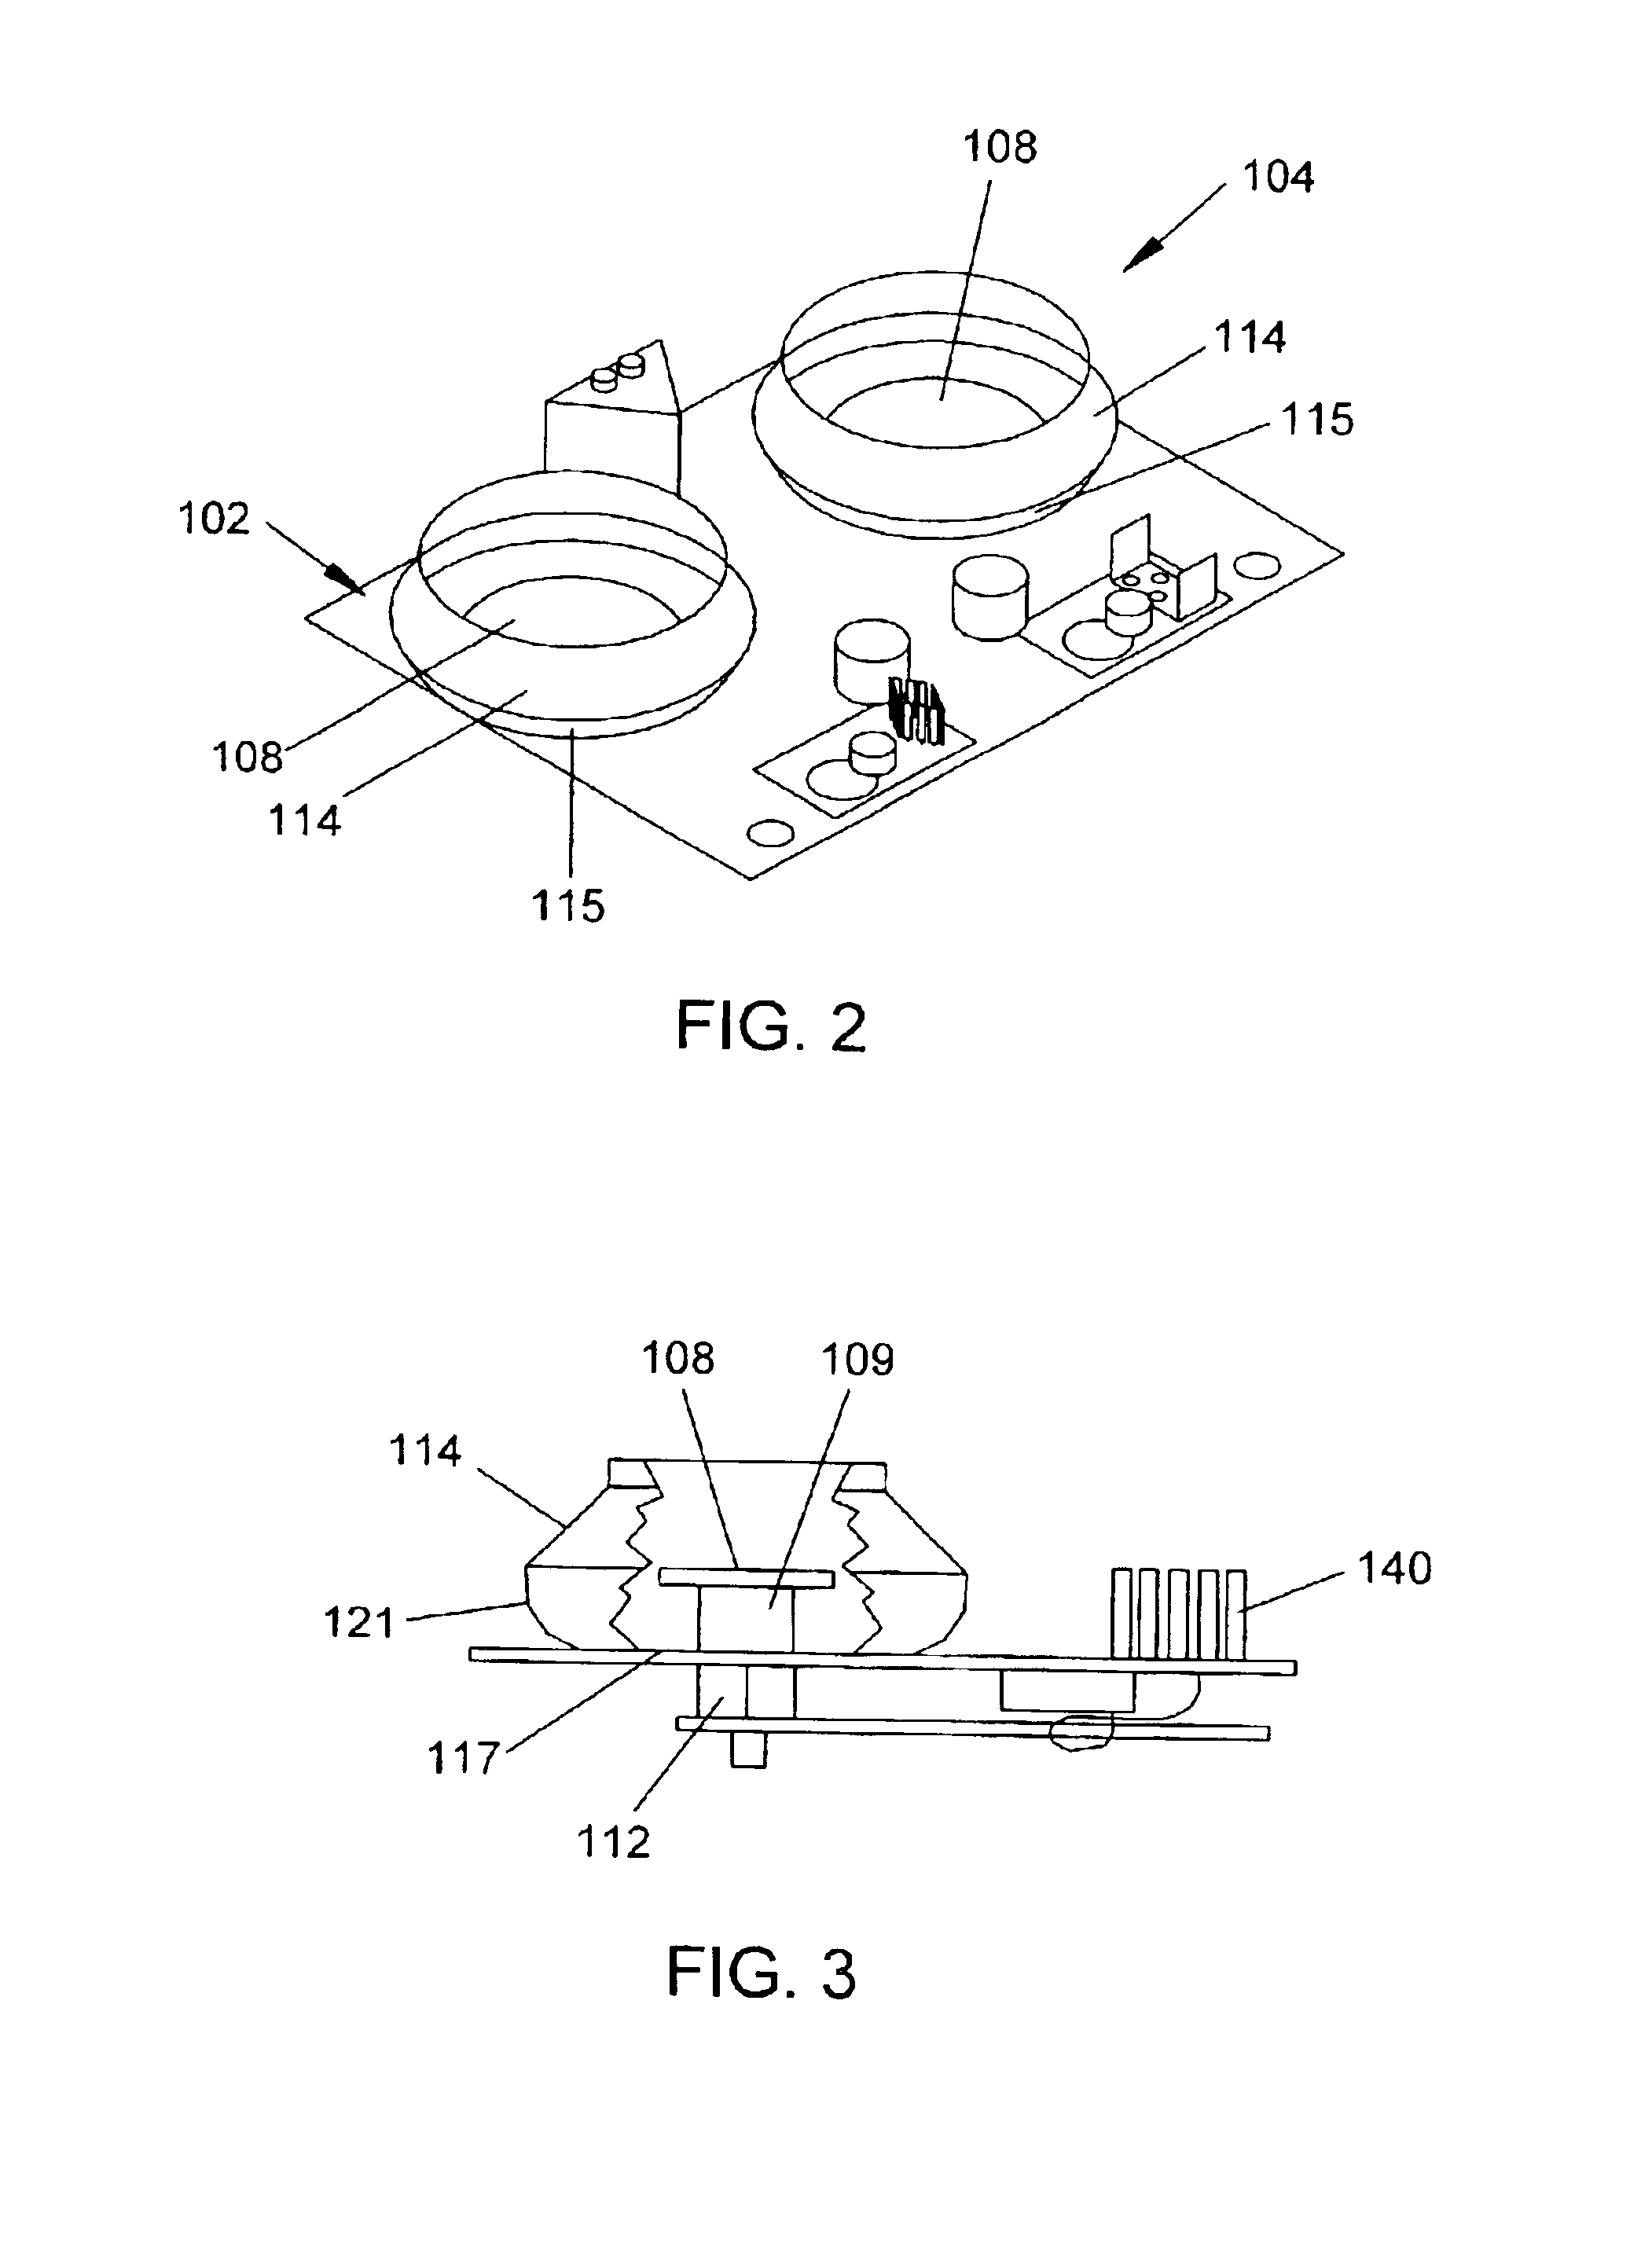 Plastic lens system, compositions, and methods